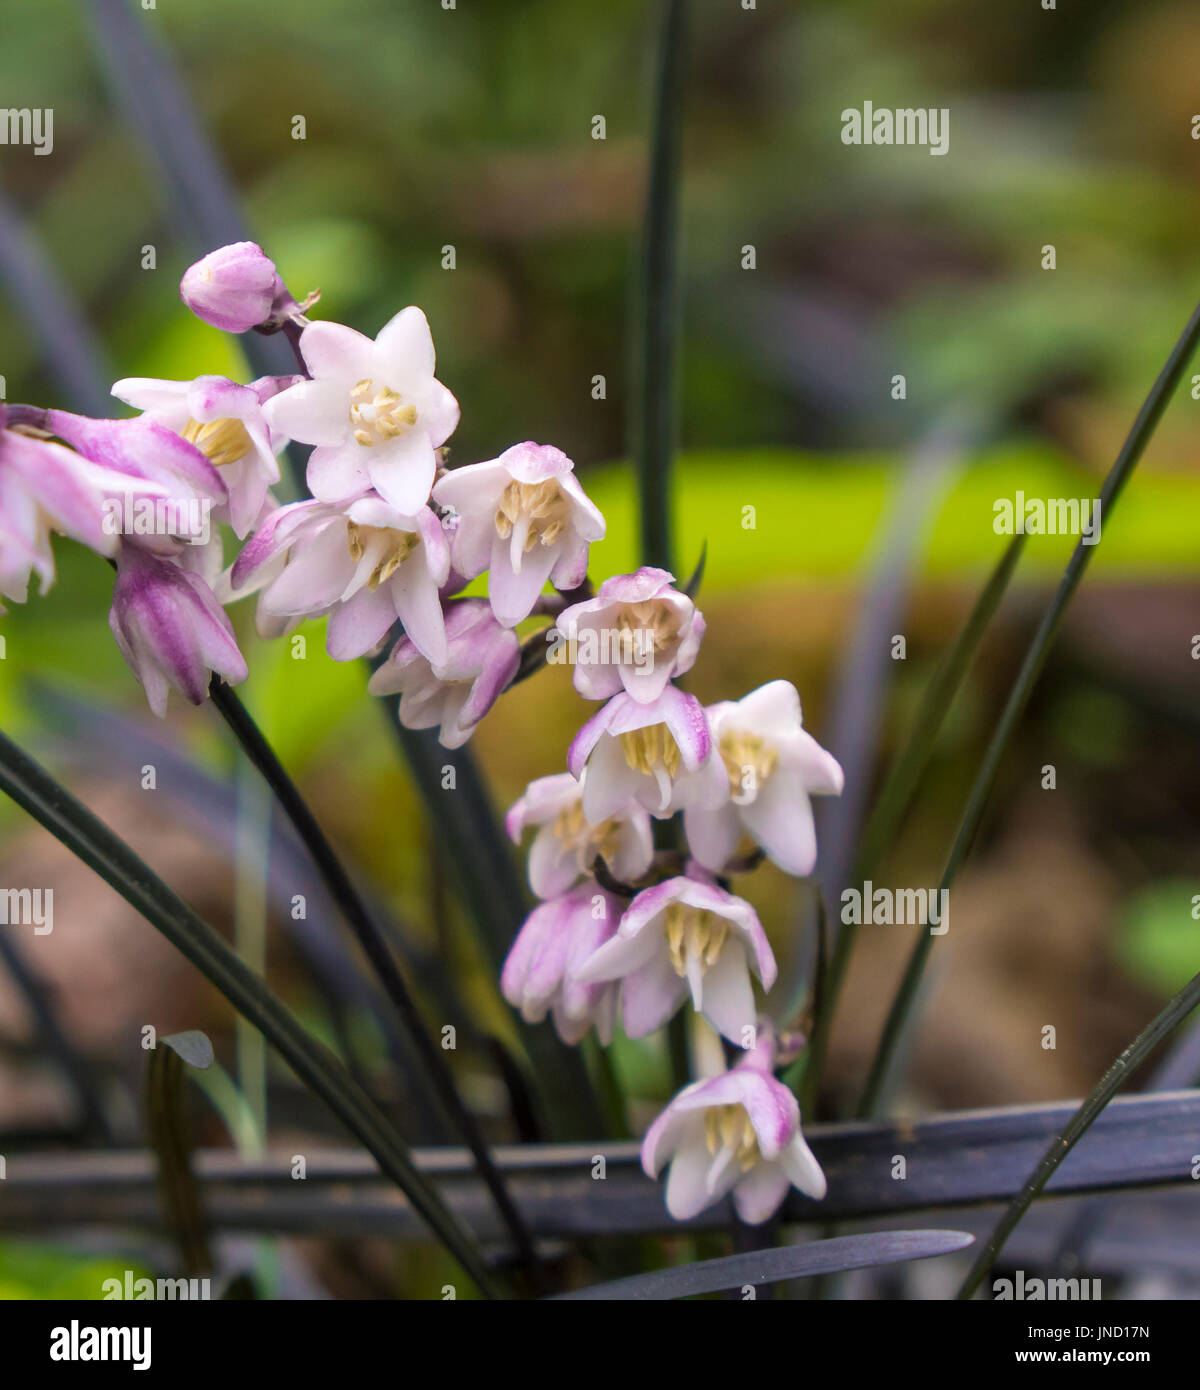 A close-up view of the pink and purple flowers of Black Mondo Grass (Ophiopogon planiscapus 'Nigrescens'). Stock Photo